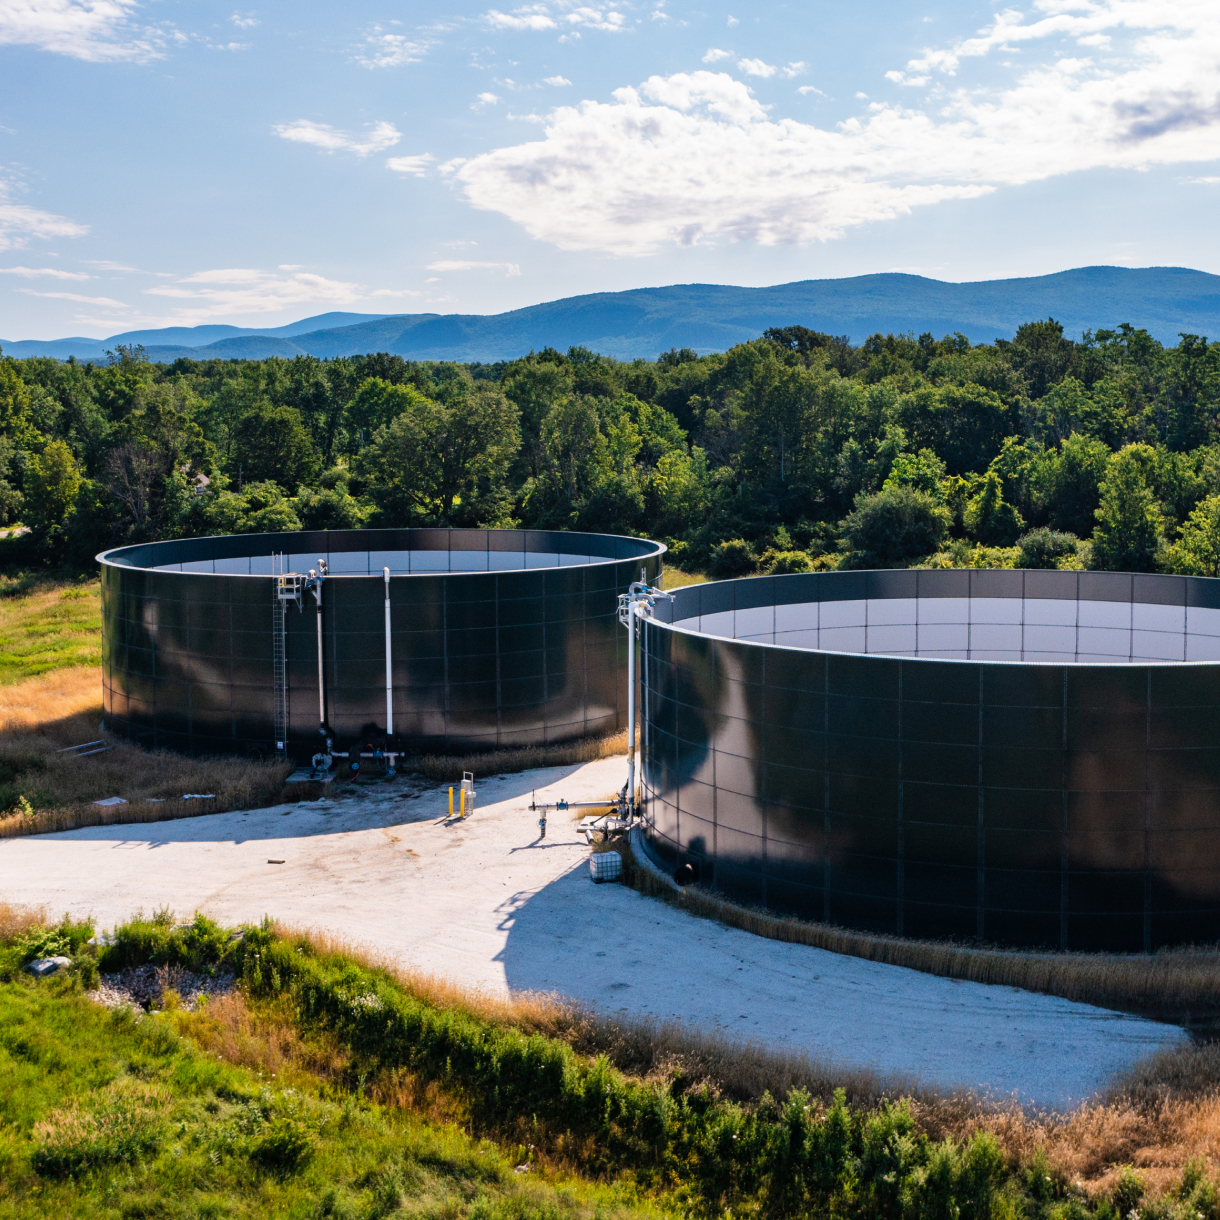 Liquid digestate tank holding low-carbon fertilizer from farm powered anaerobic digestion